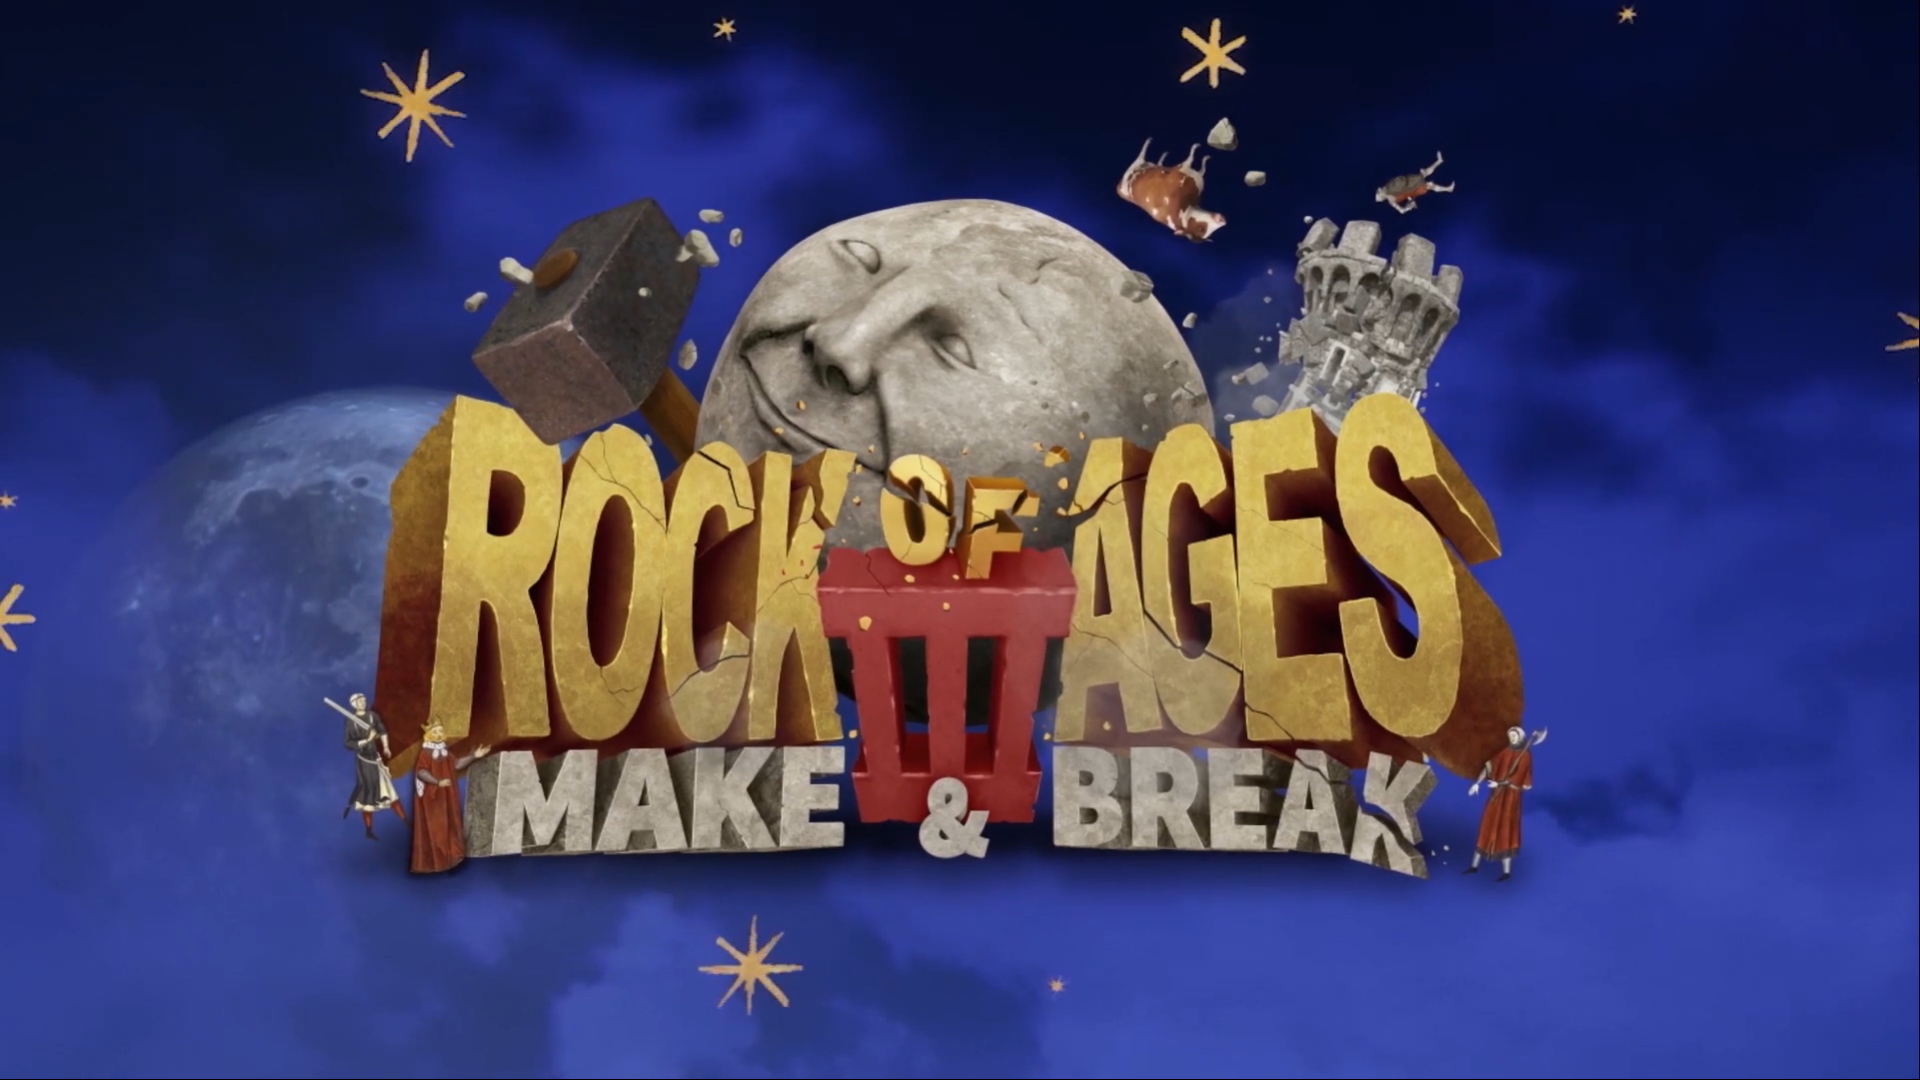 Rock of ages on steam фото 103